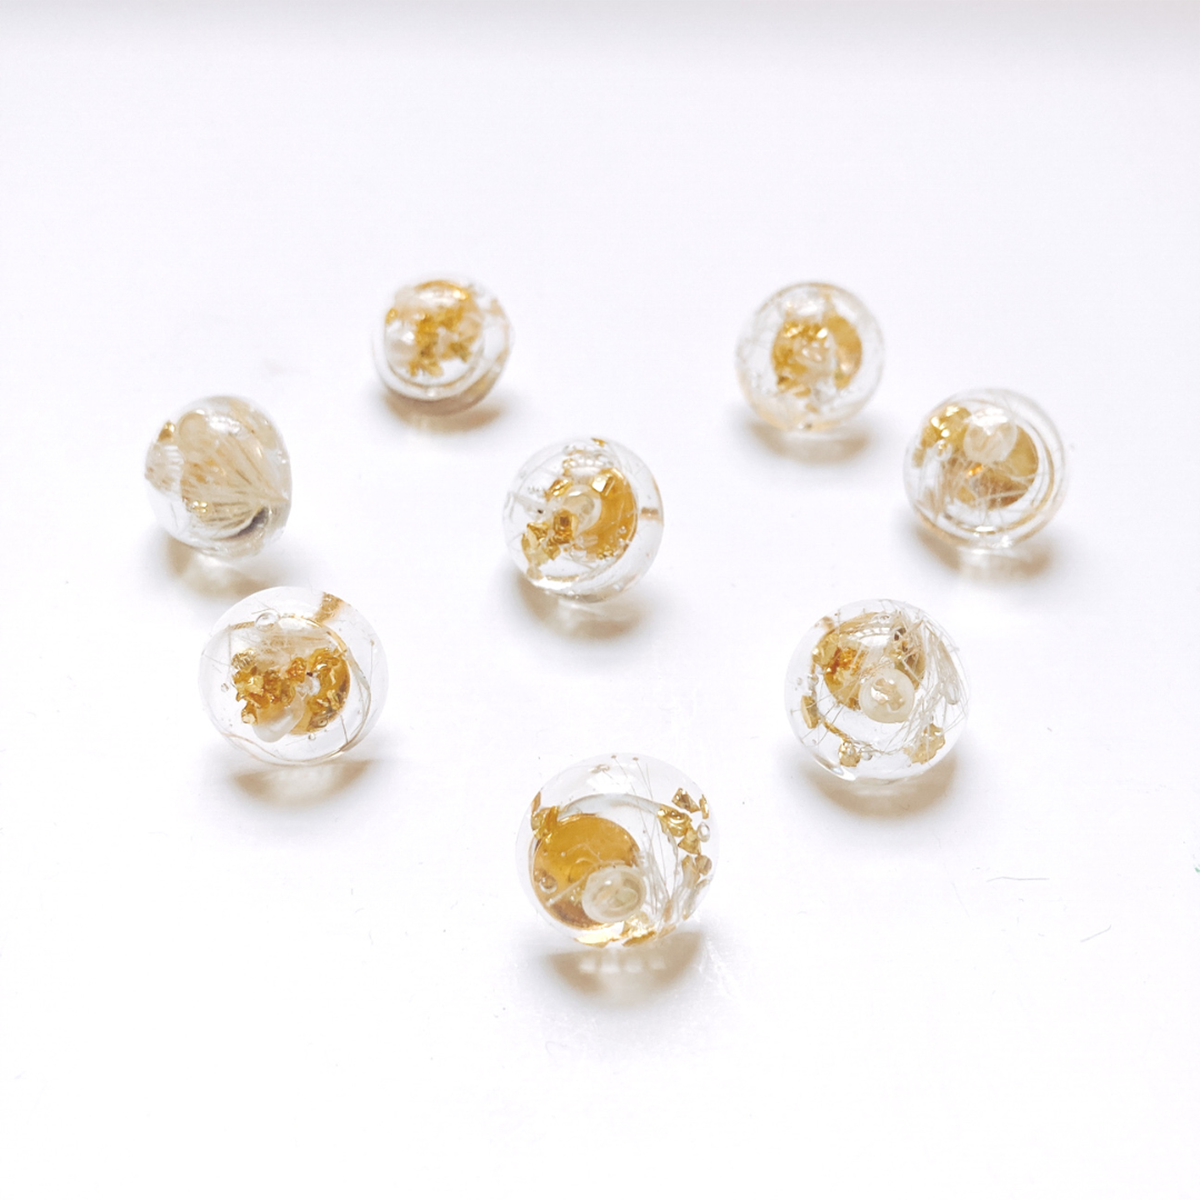  Earring With White Pearl, Gold Stones and Dry Flower. Pearl Earring by Hikaru Pearl